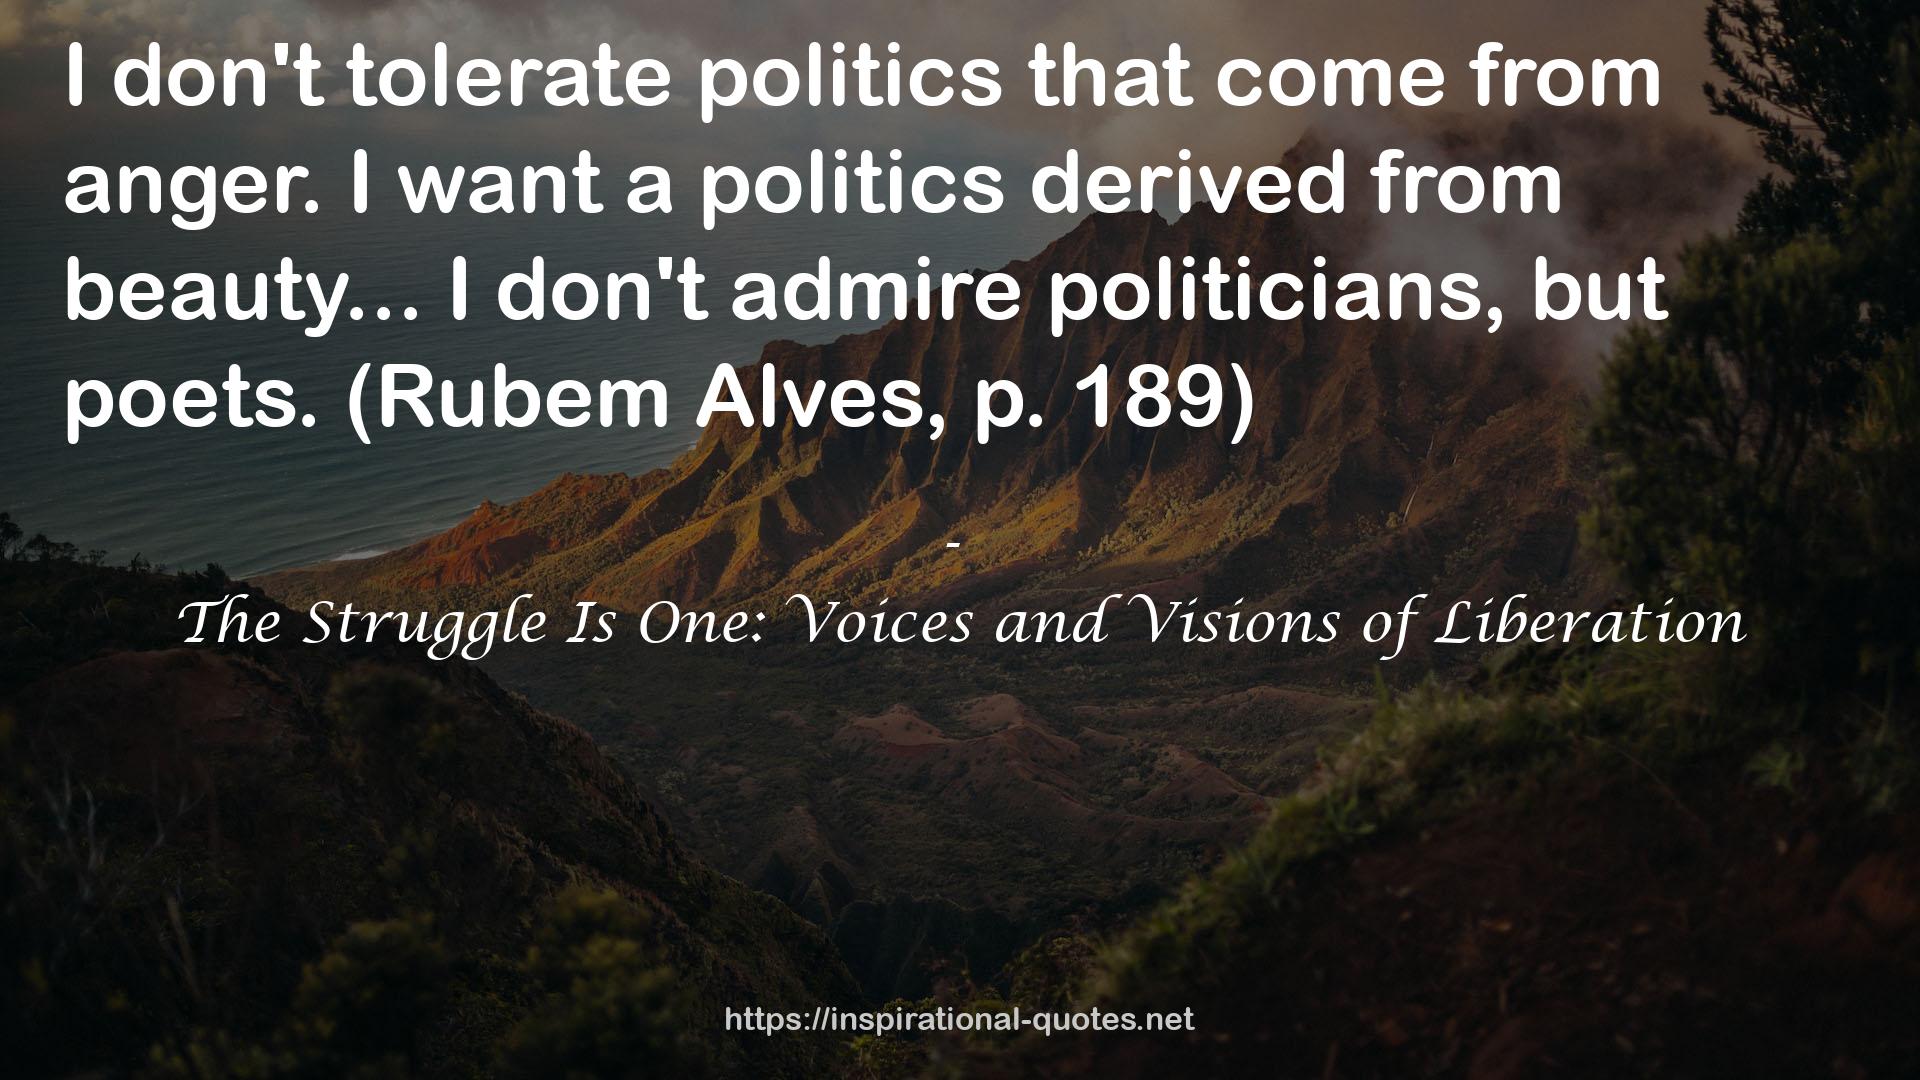 The Struggle Is One: Voices and Visions of Liberation QUOTES